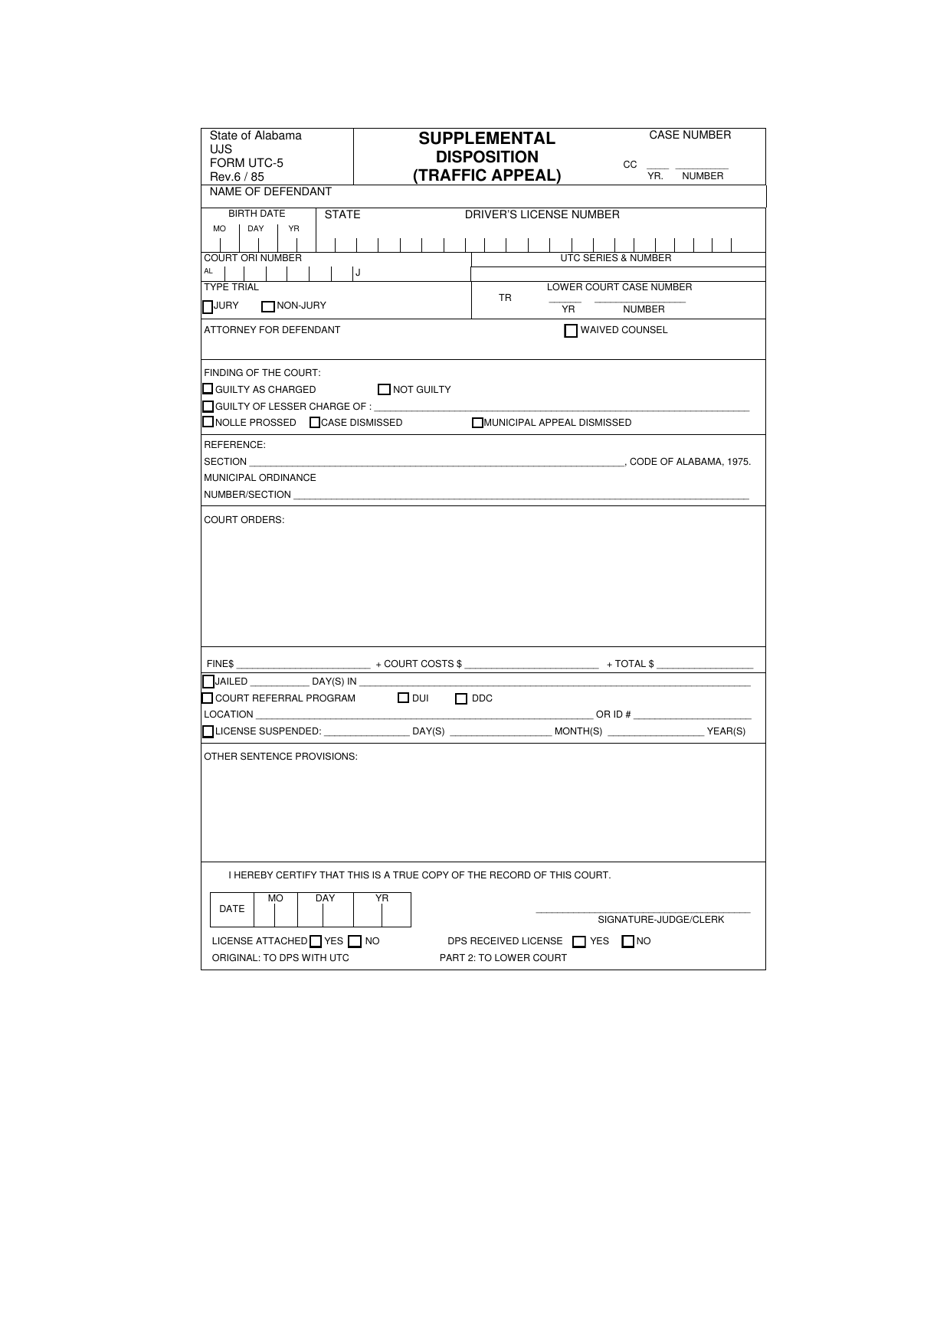 Form UTC-5 Supplemental Disposition (Traffic Appeal) - Alabama, Page 1